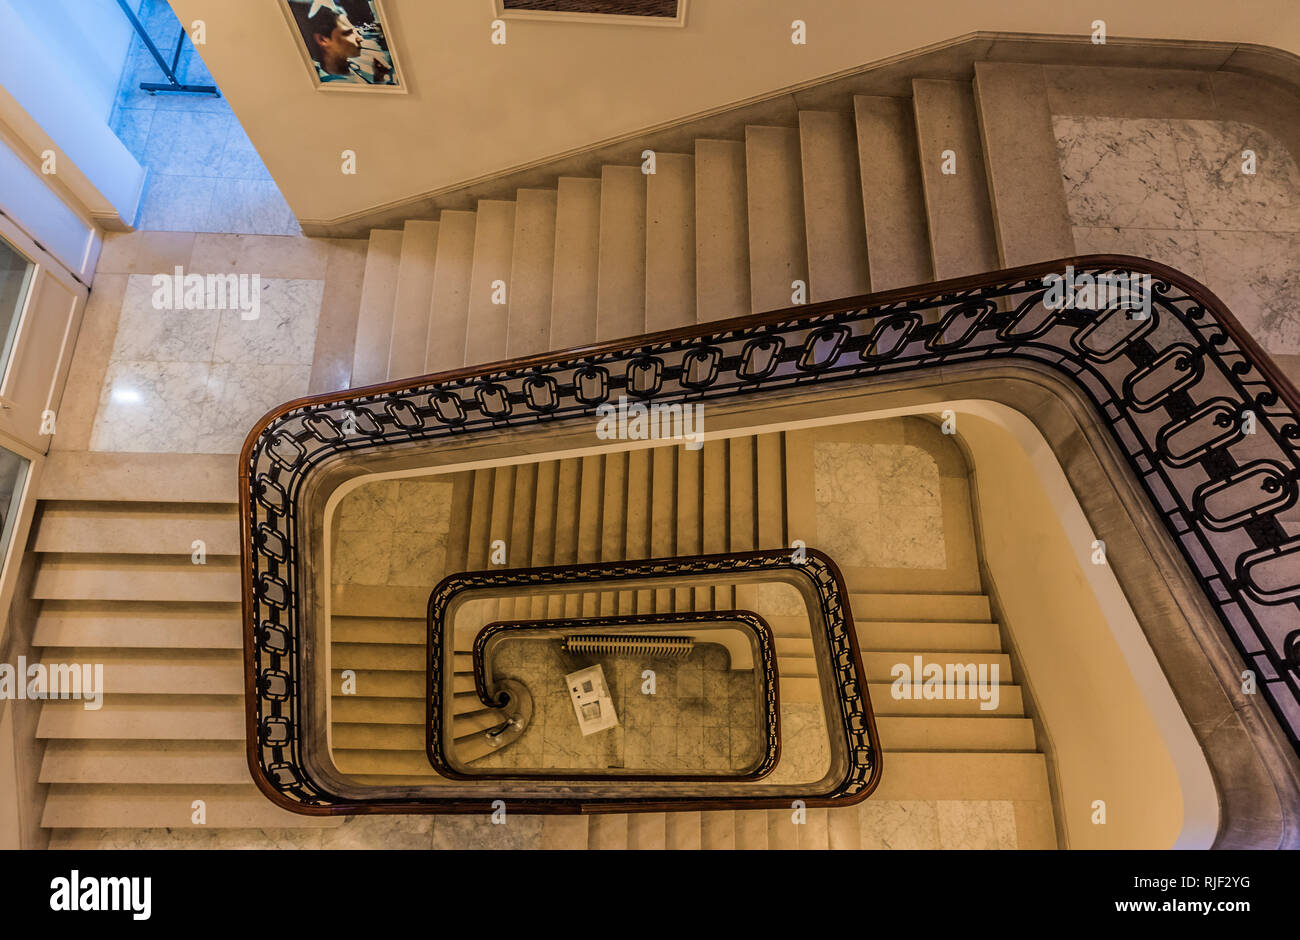 Brussels, Belgium - 02 02 2019:  Spiral staircase of the Brussels Parliament durig a local touristical visit Stock Photo